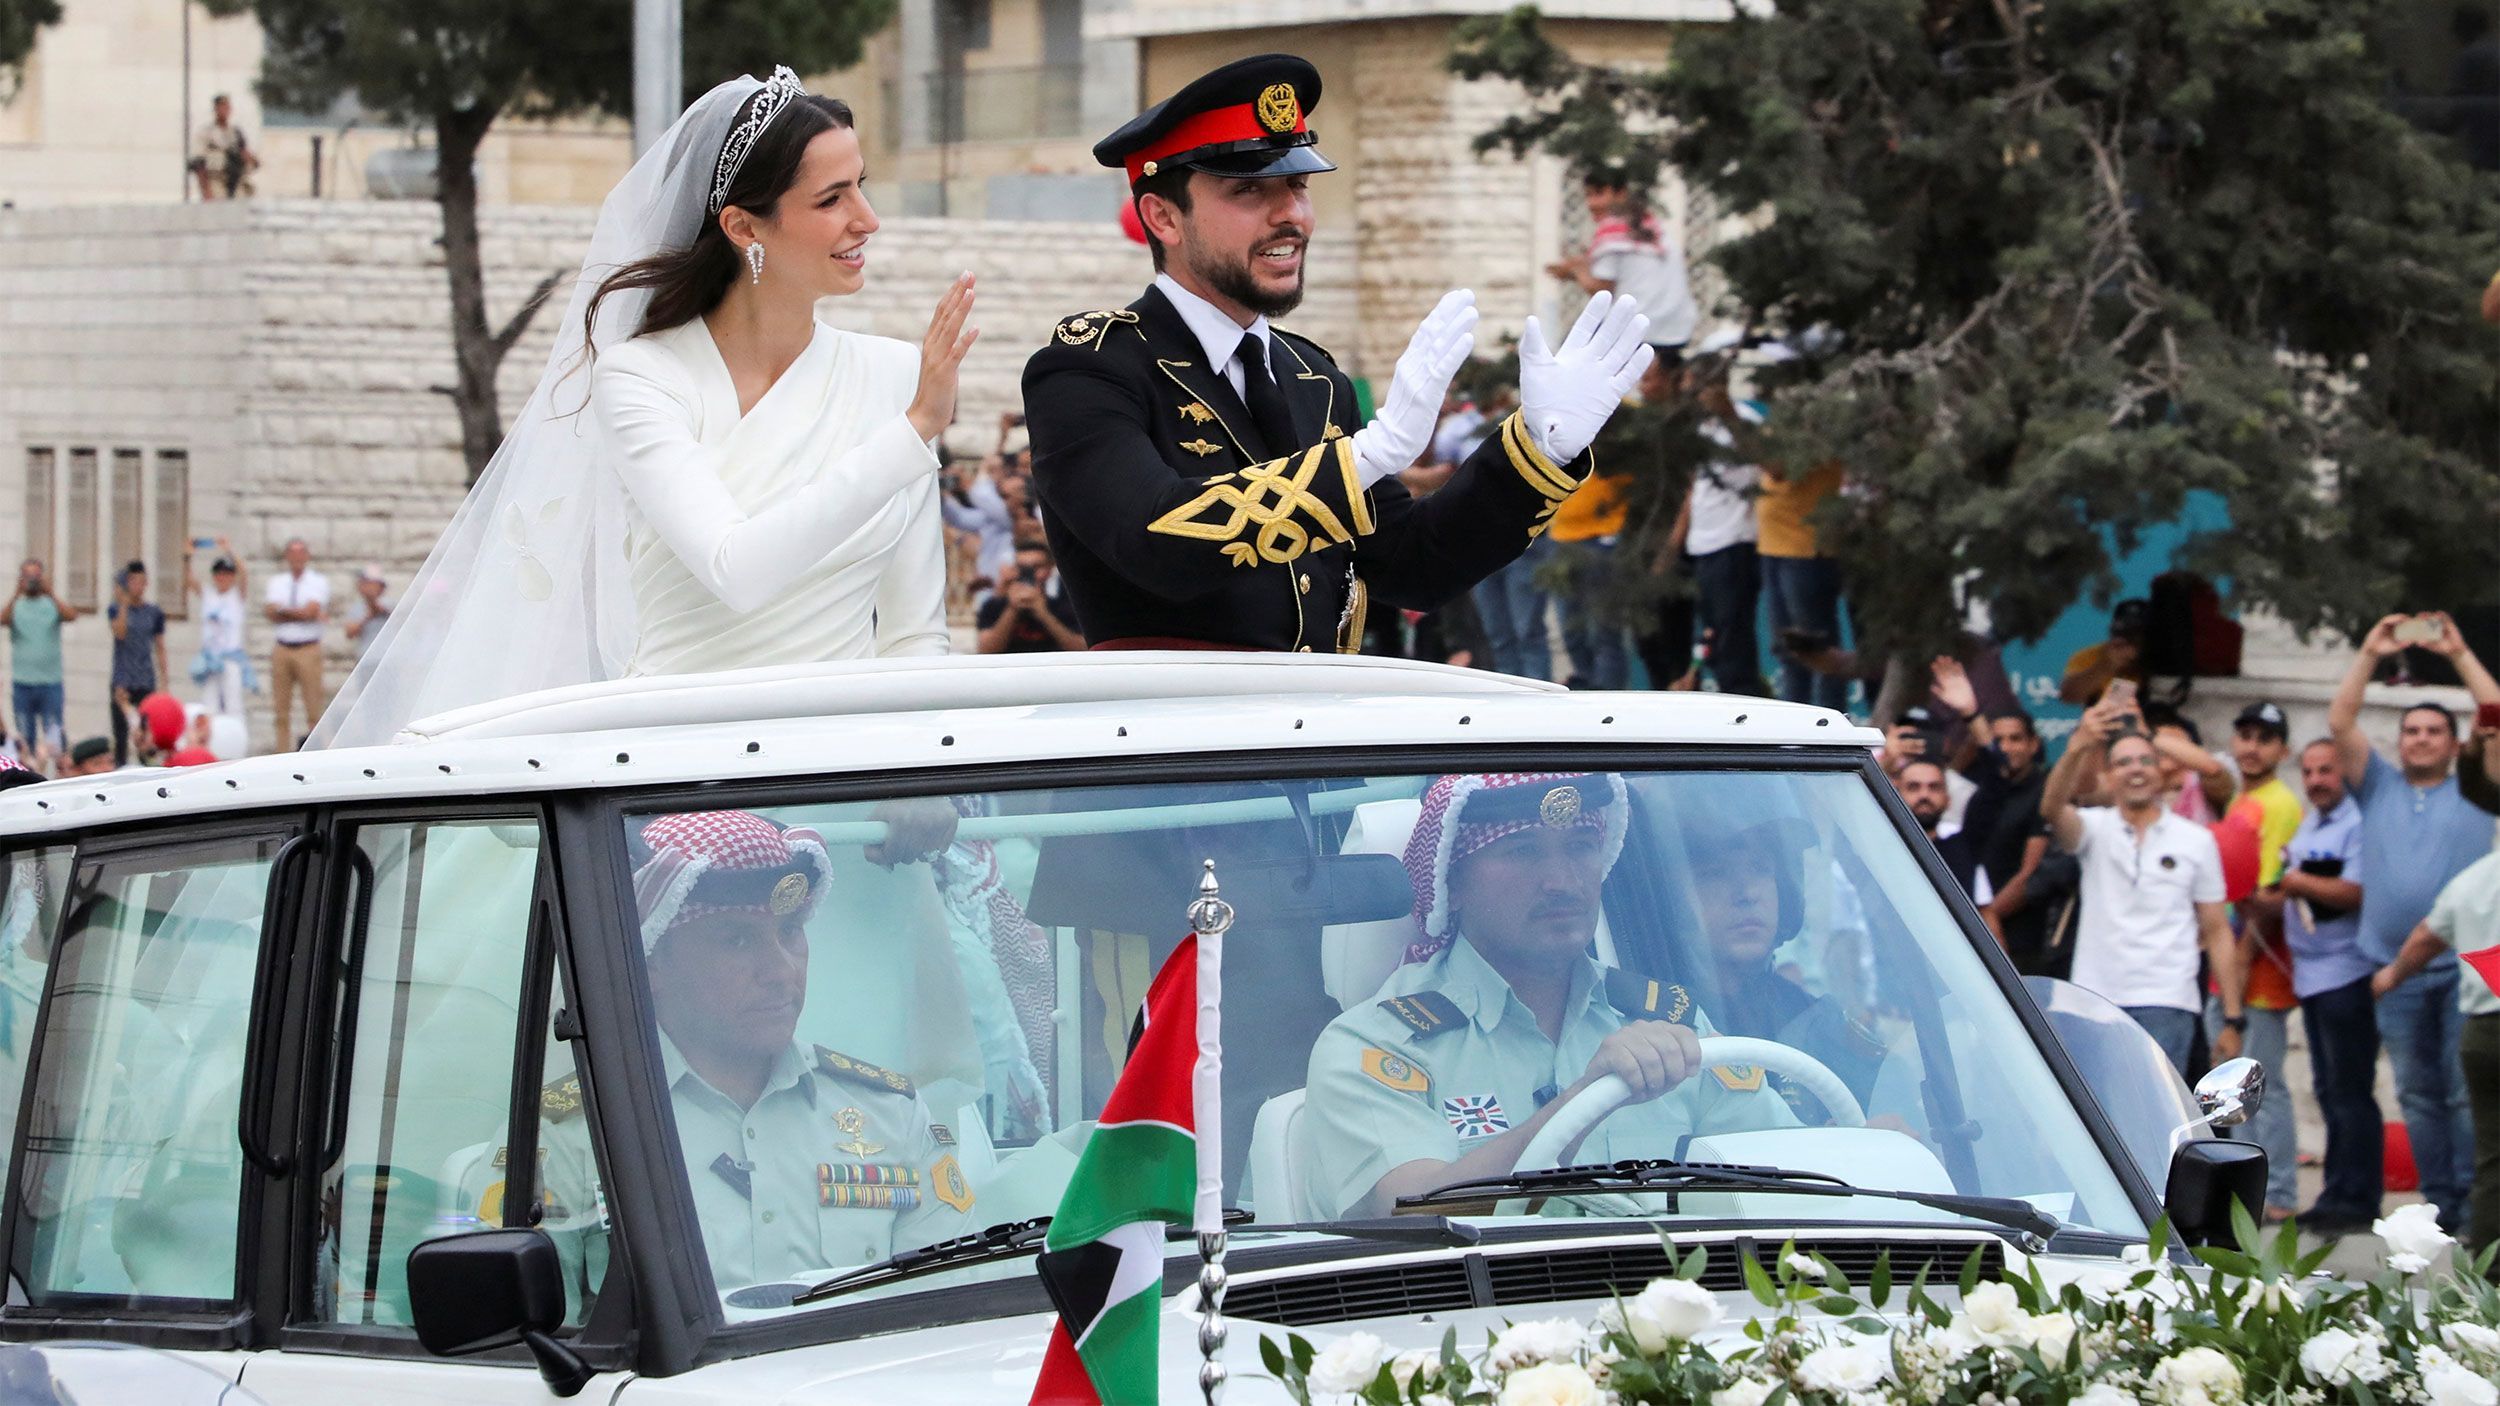 Jordan's Crown Prince Hussein (right) and Rajwa Alseif wave to crowds on their wedding day in Amman.